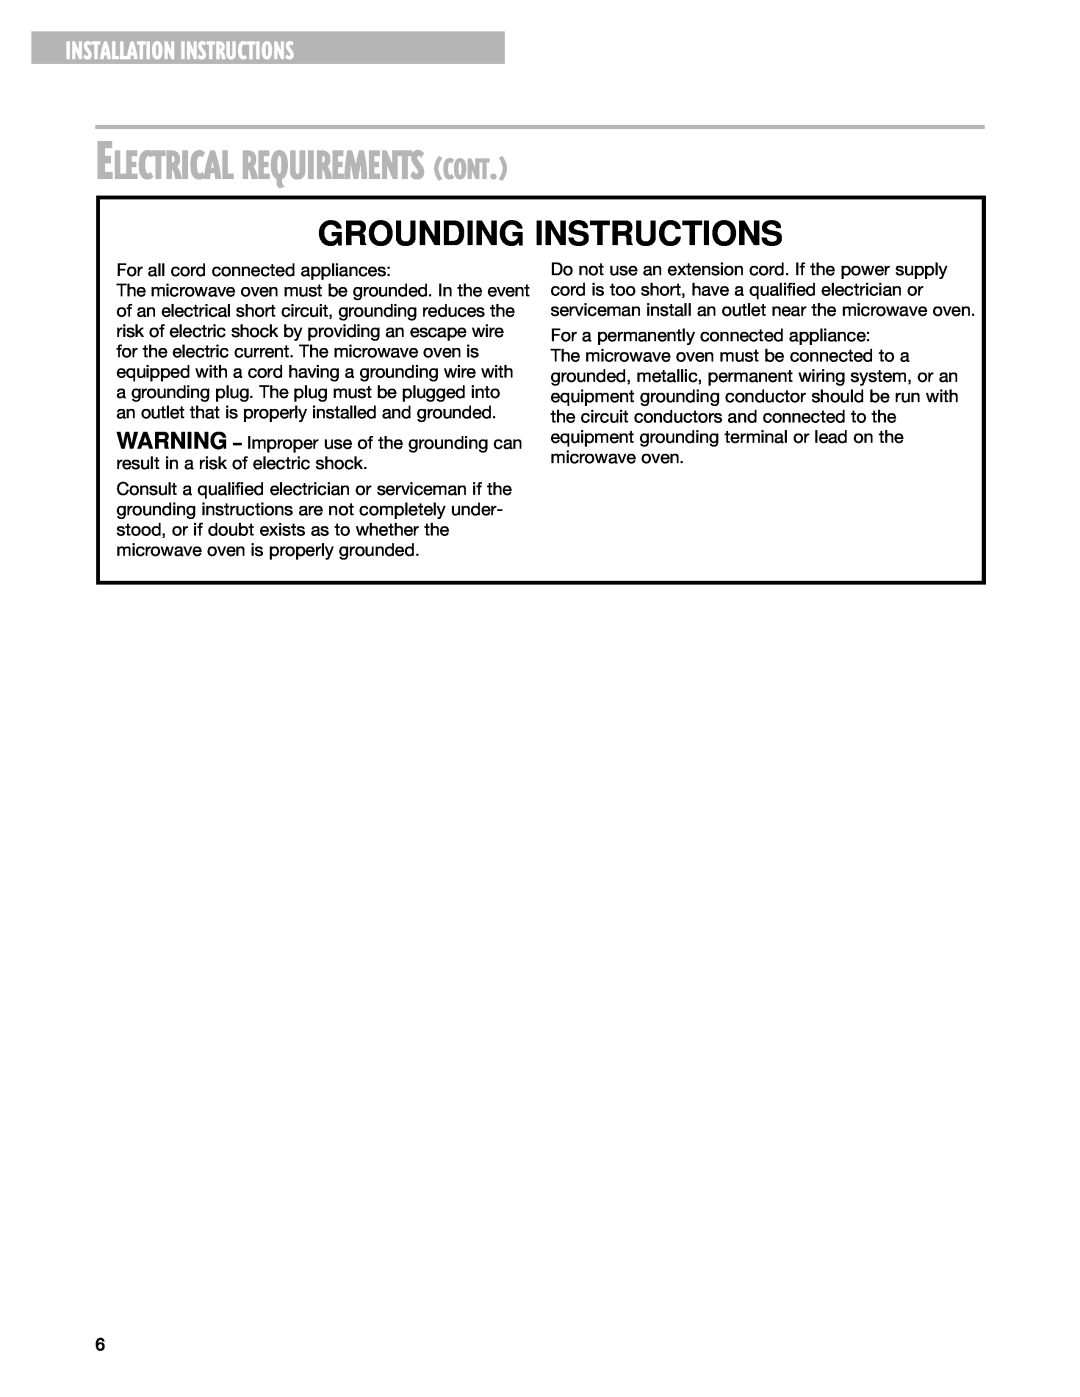 Whirlpool MT1130SG, MT1151SG, MT1131SG Electrical Requirements Cont, Grounding Instructions, Installation Instructions 